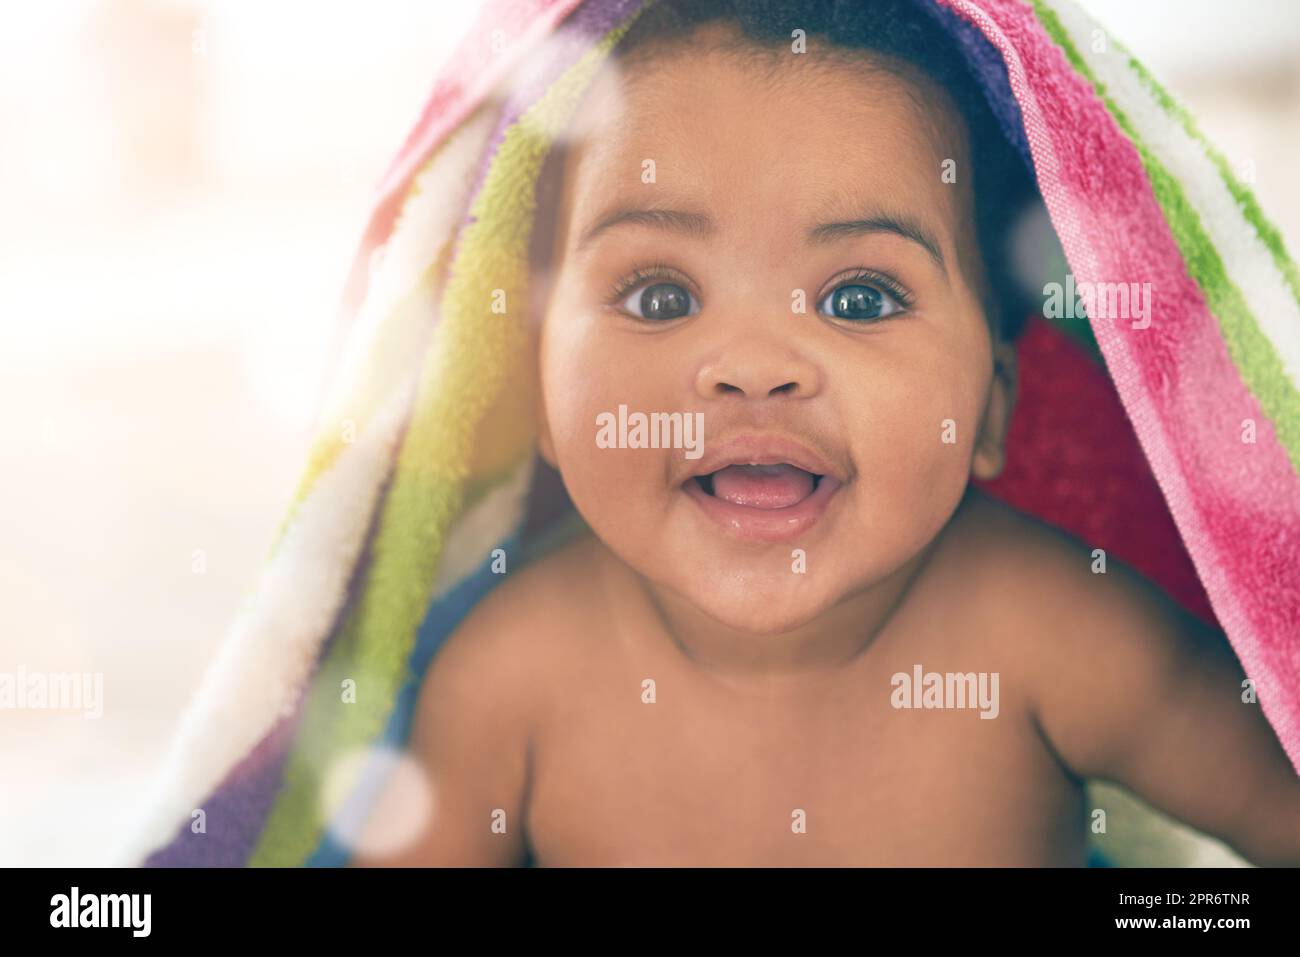 Babies make the world a cuter place. Shot of an adorable baby girl covered in a colorful blanket at home. Stock Photo